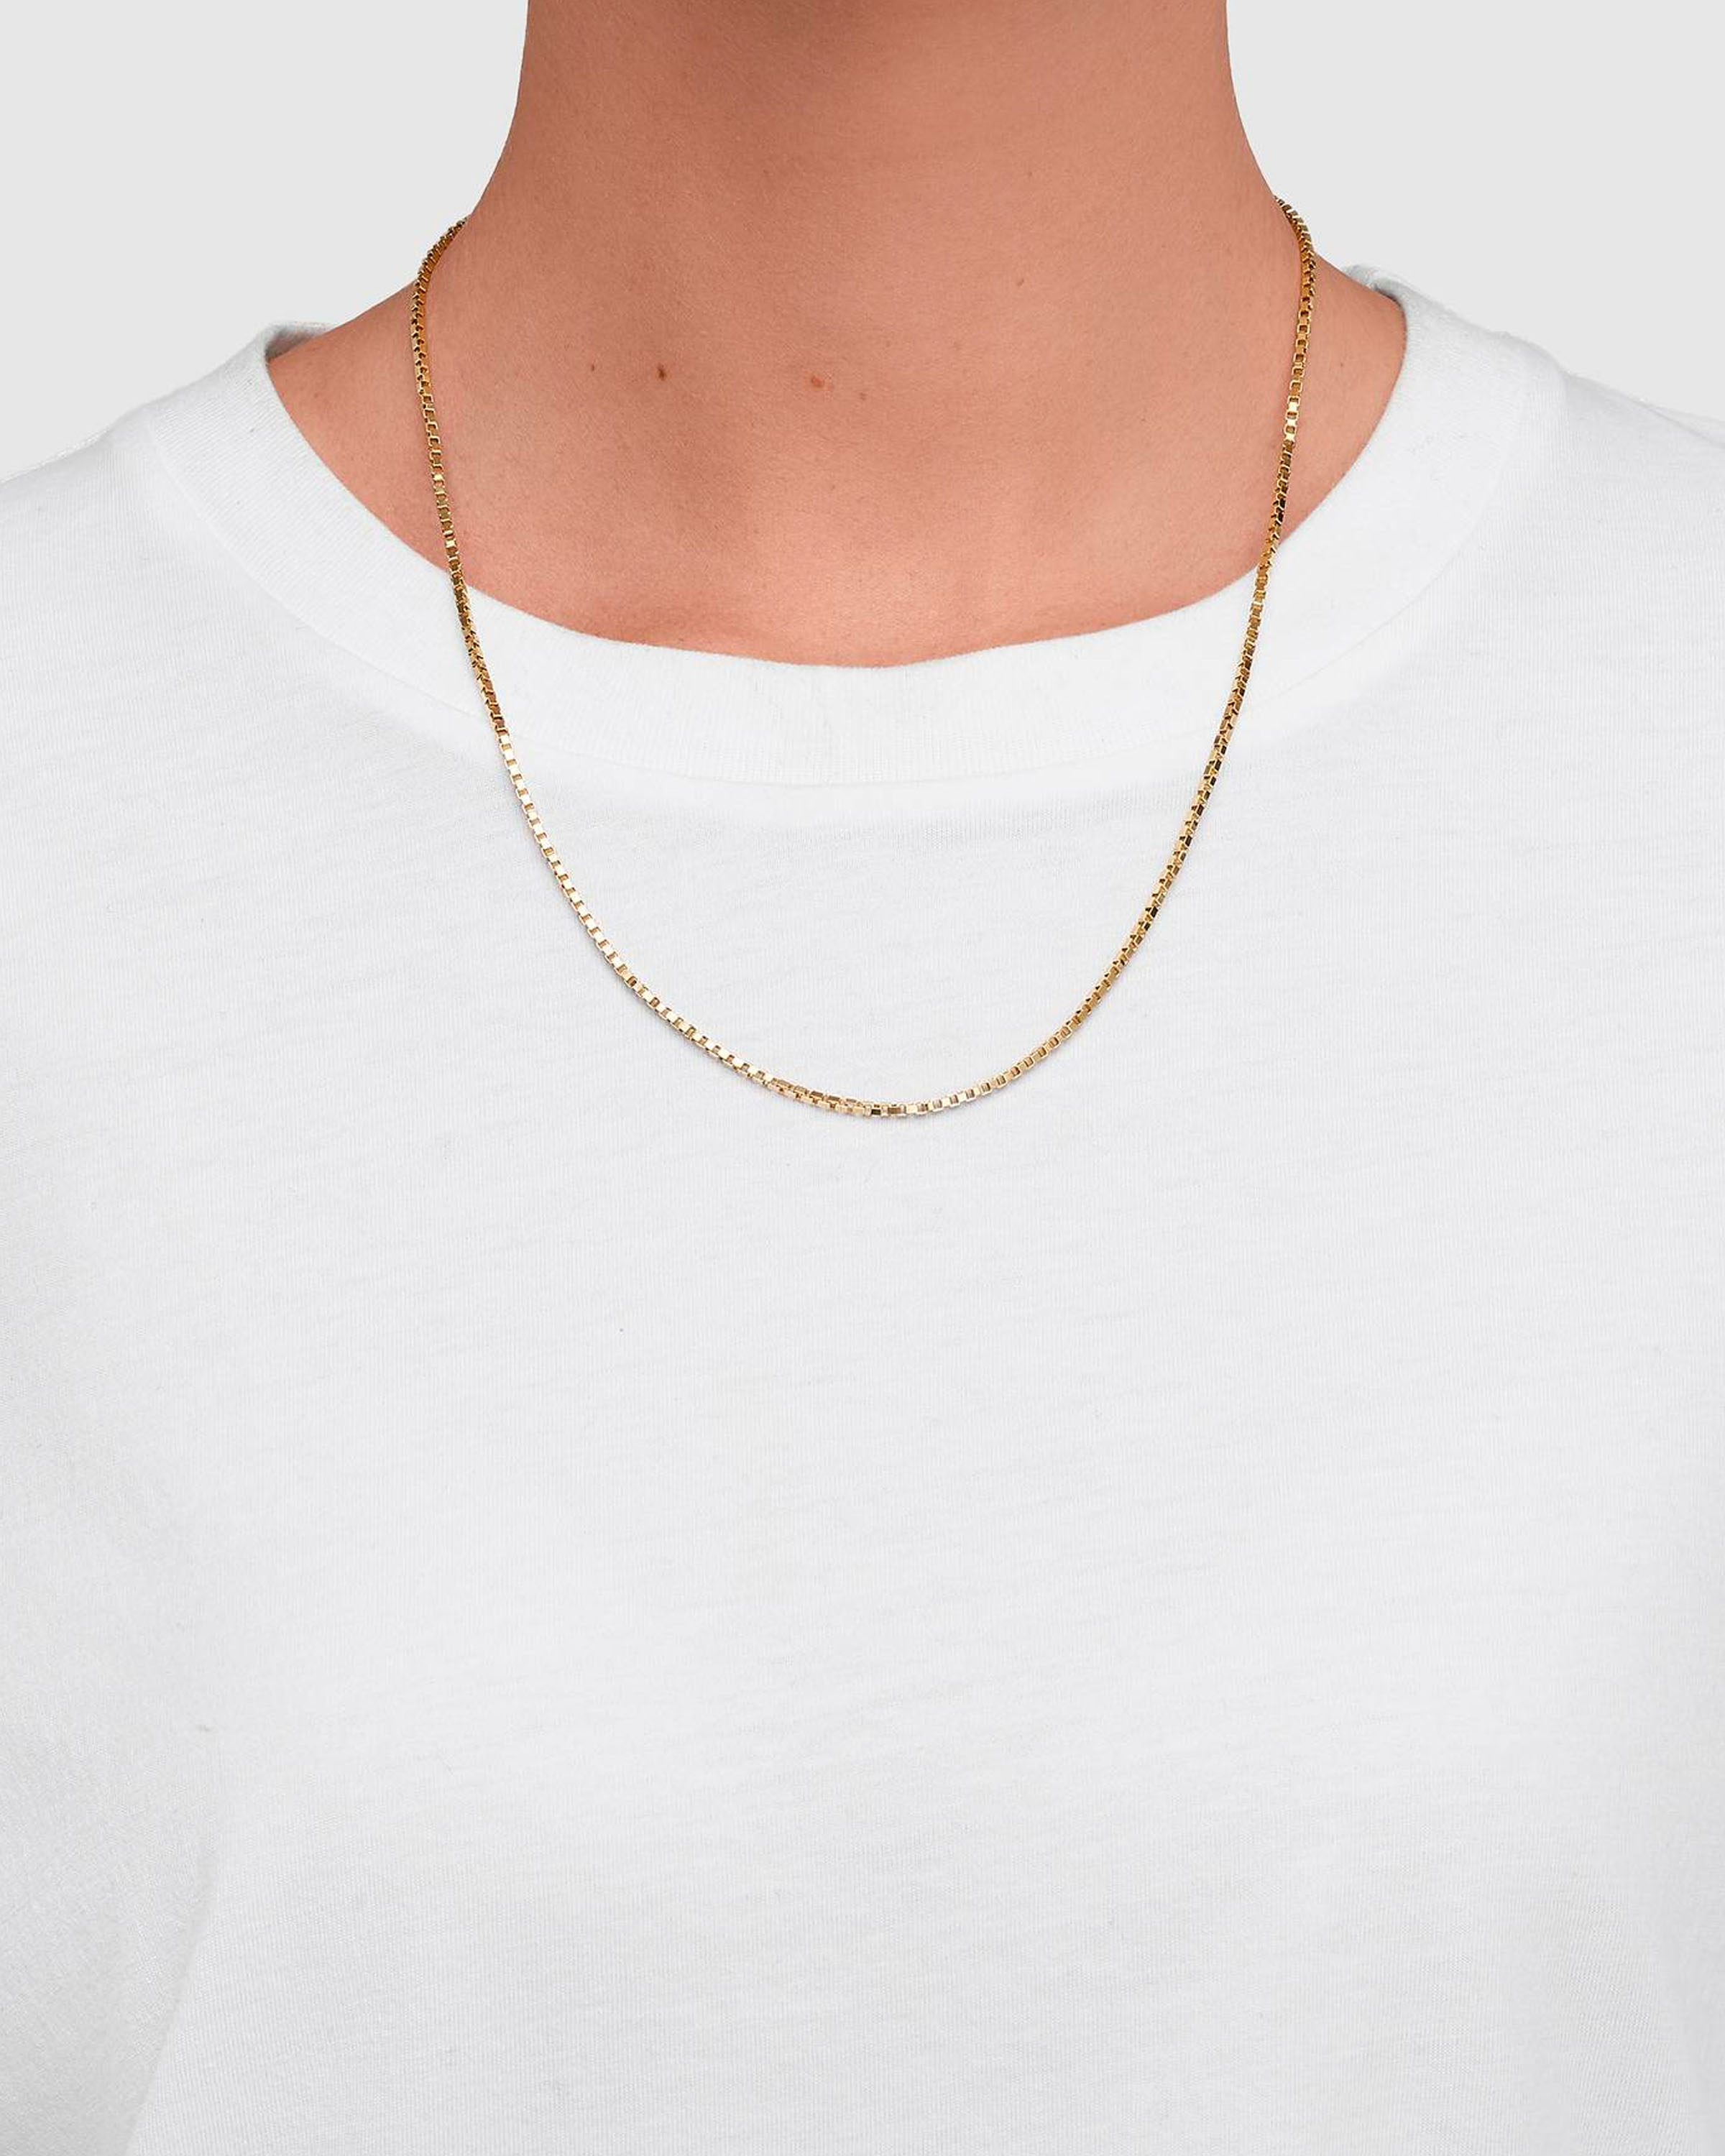 Square Chain Gold $259 Tom Wood Jewelry Necklaces Gold